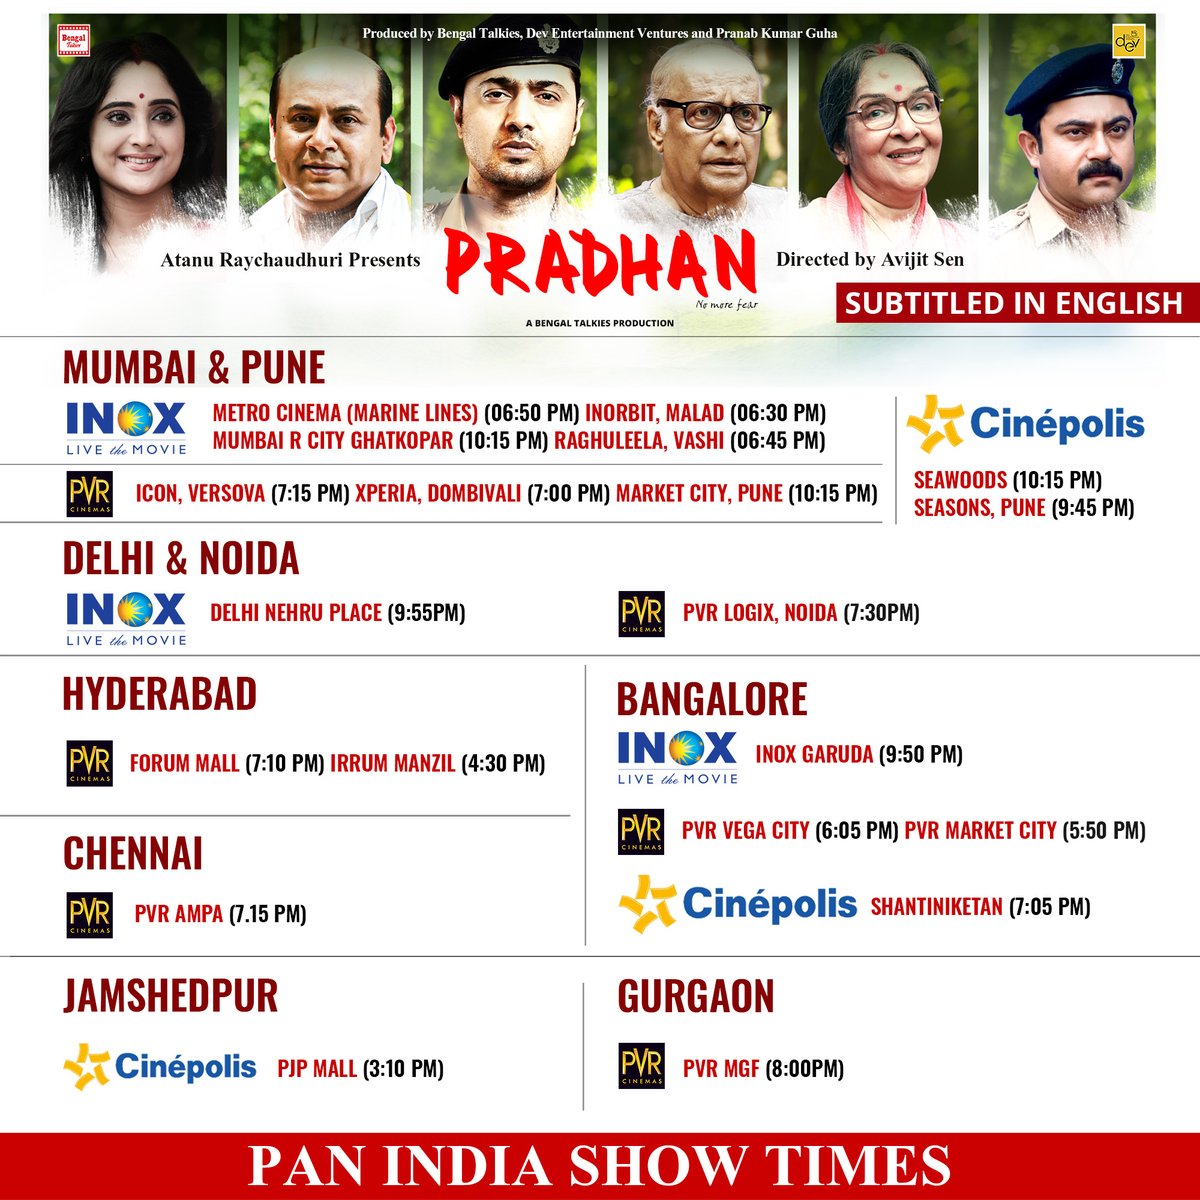 #Pradhan is set to win hearts all across India. Presenting the Pan-India Hall List for the opening week. Book your tickets: in.bookmyshow.com/movies/pradhan… #NoMoreFear #InCinemasNow #ThisWinter #BookNow